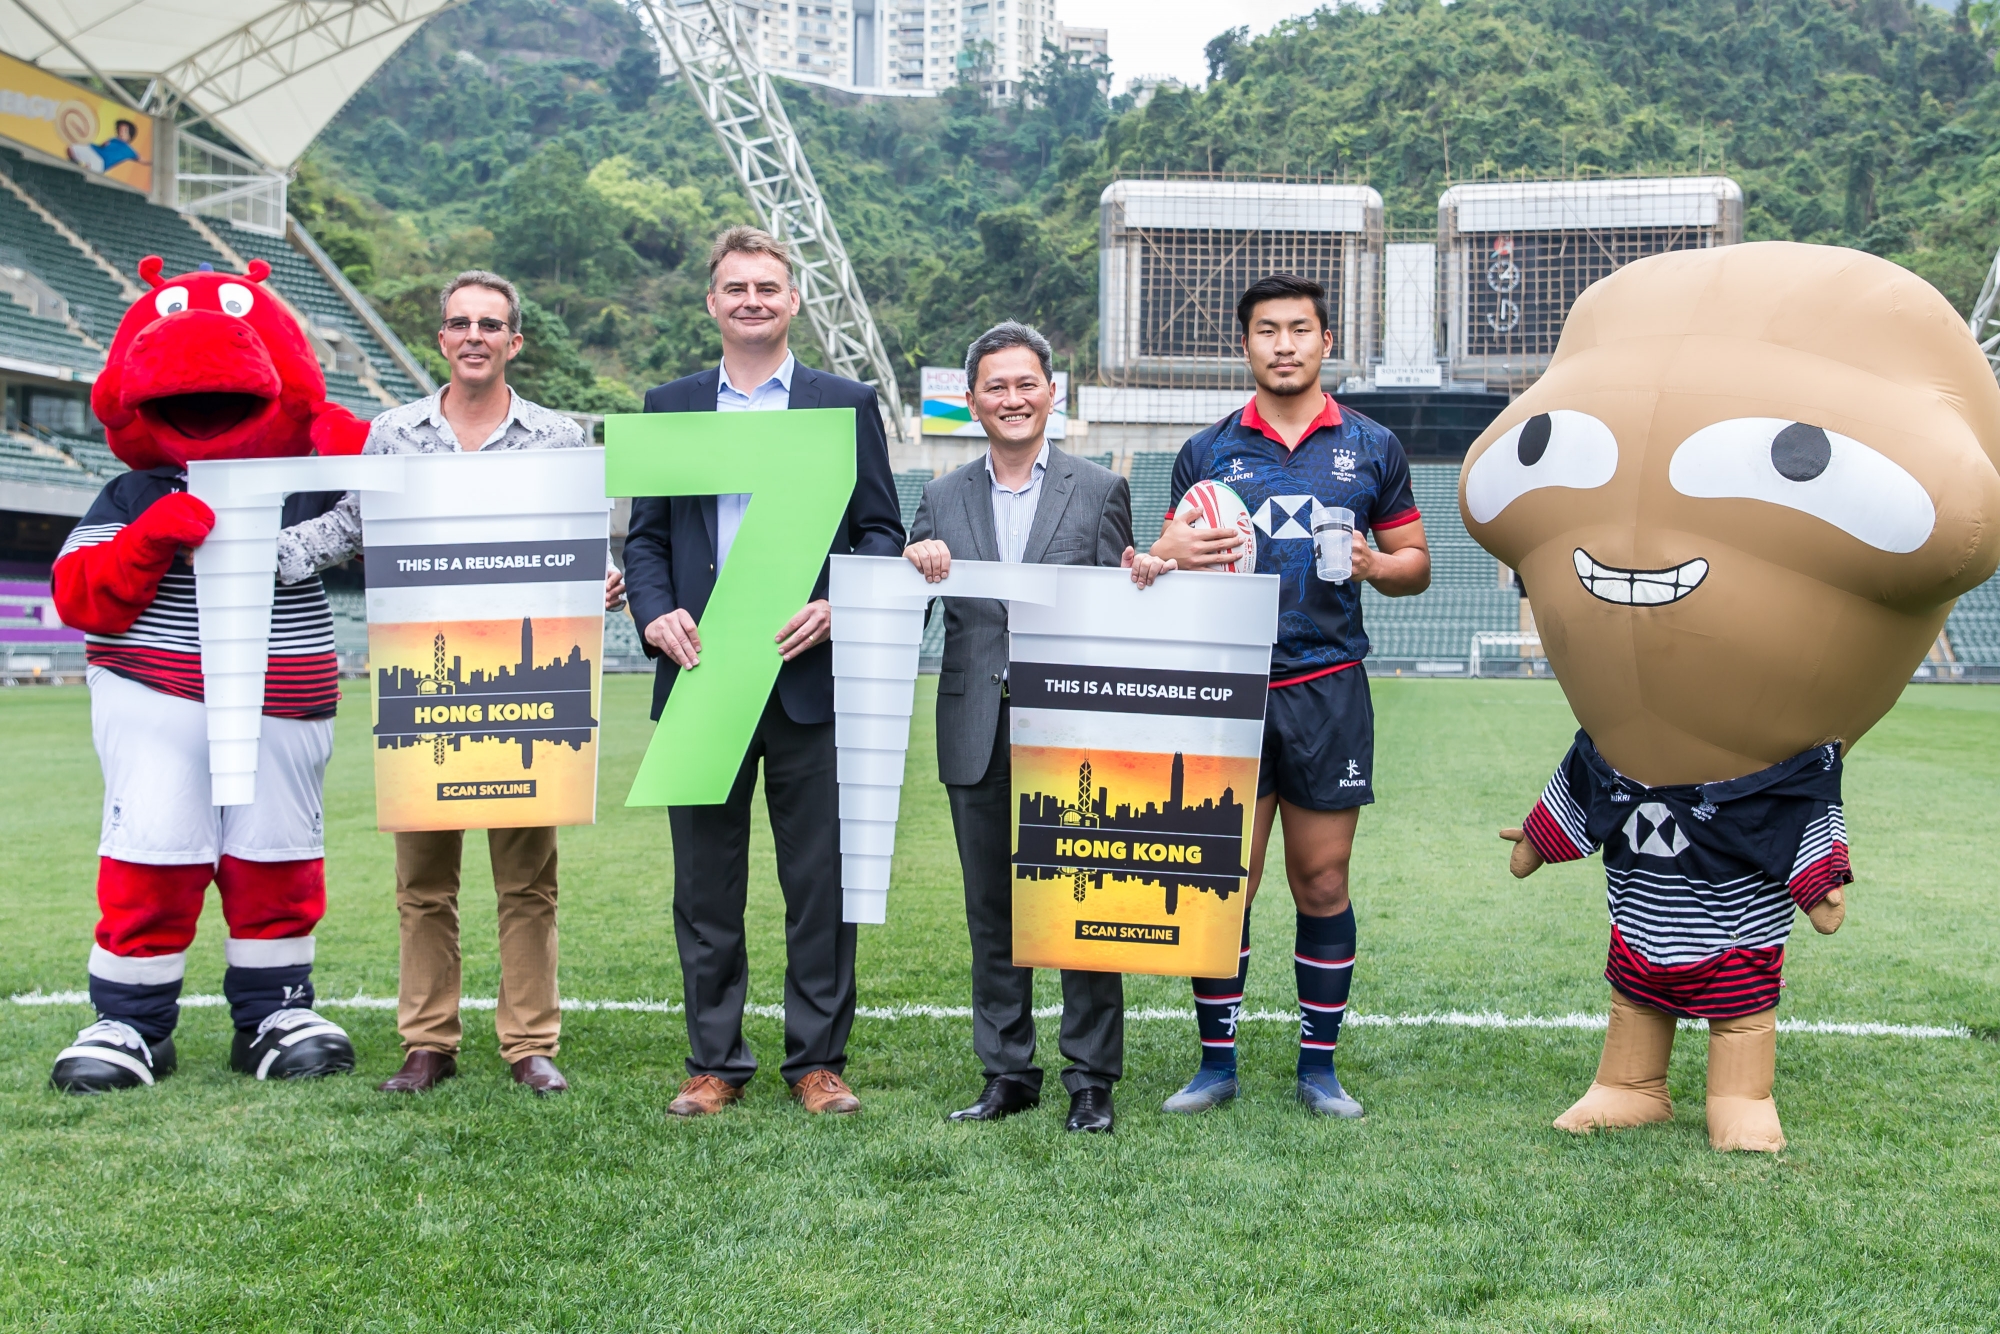 Drink from a cup of kindness at Cathay Pacific/HSBC Hong Kong Sevens 